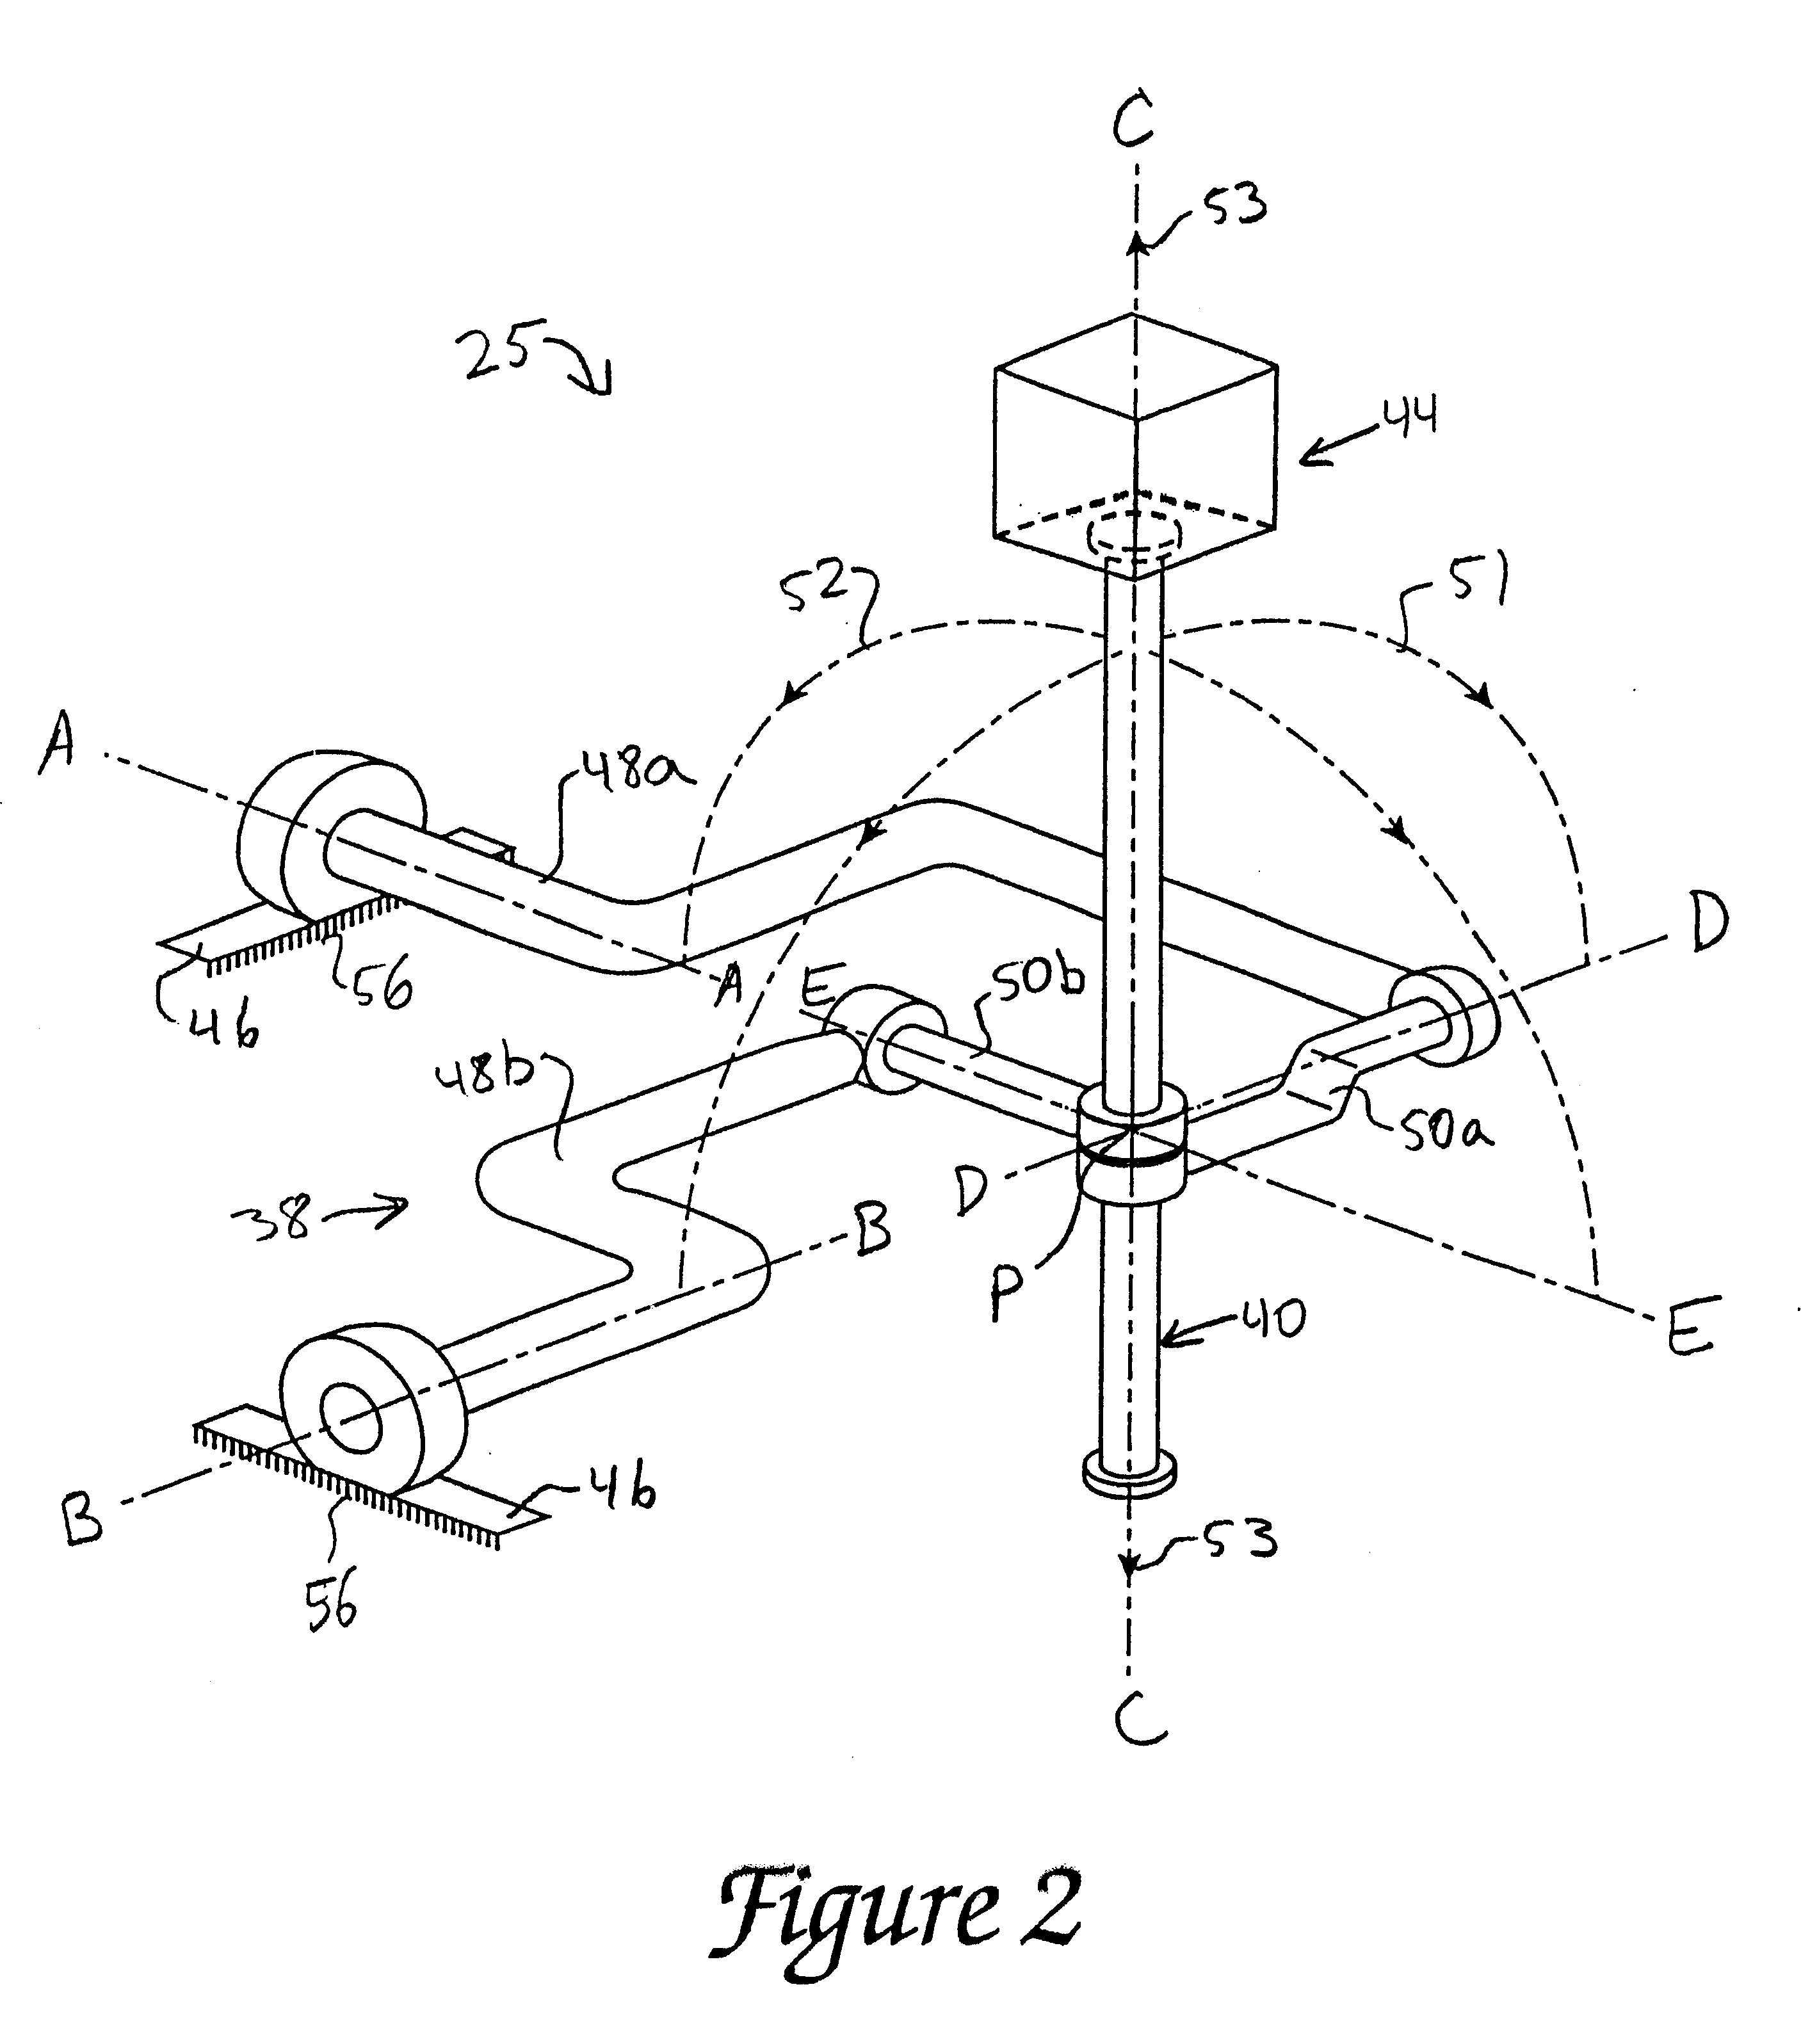 Passive force feedback for computer interface devices